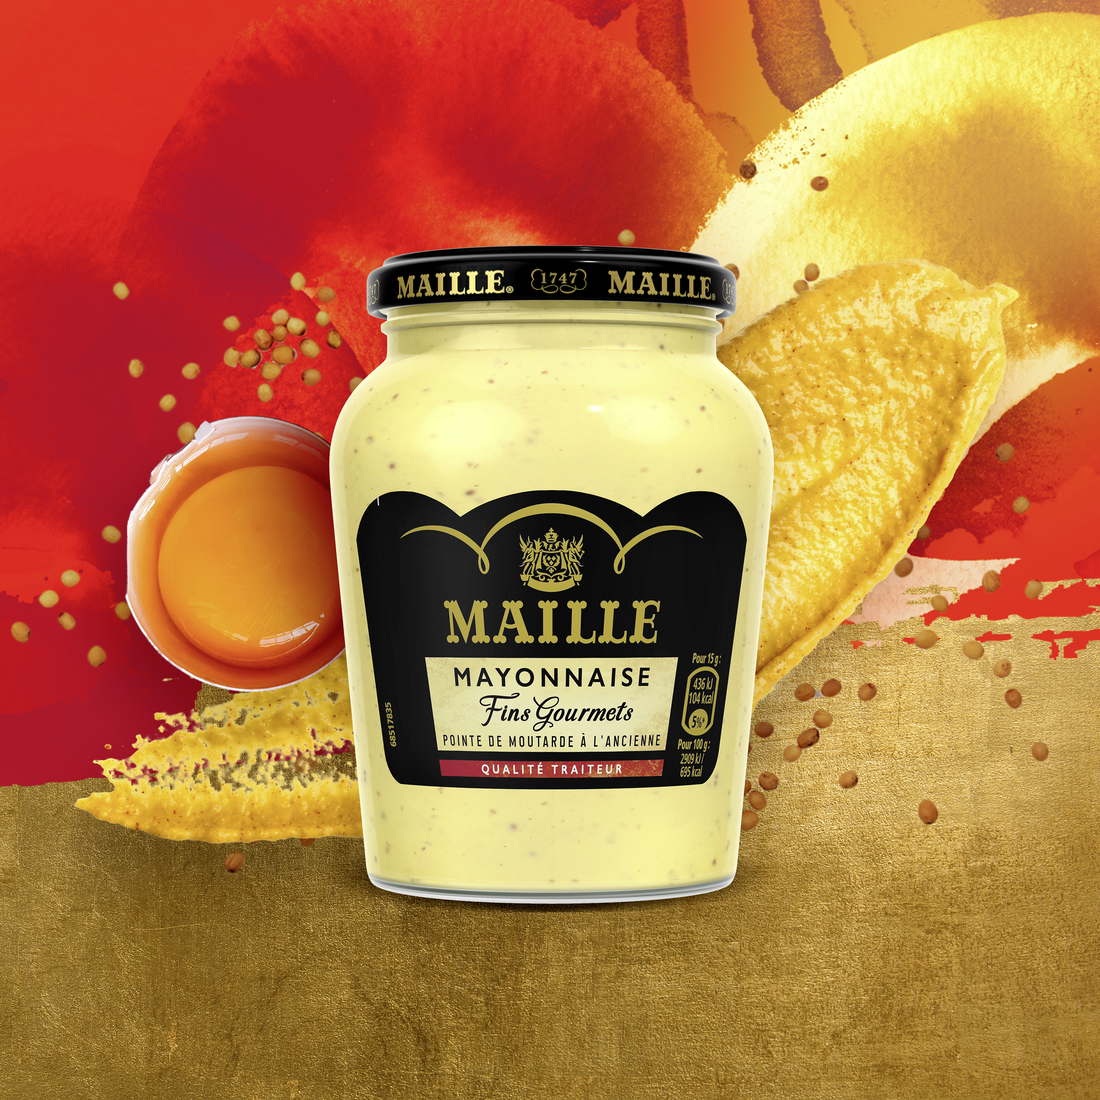 Maille - Mayonnaise Fins Gourmets Bocal 320 g, new visual